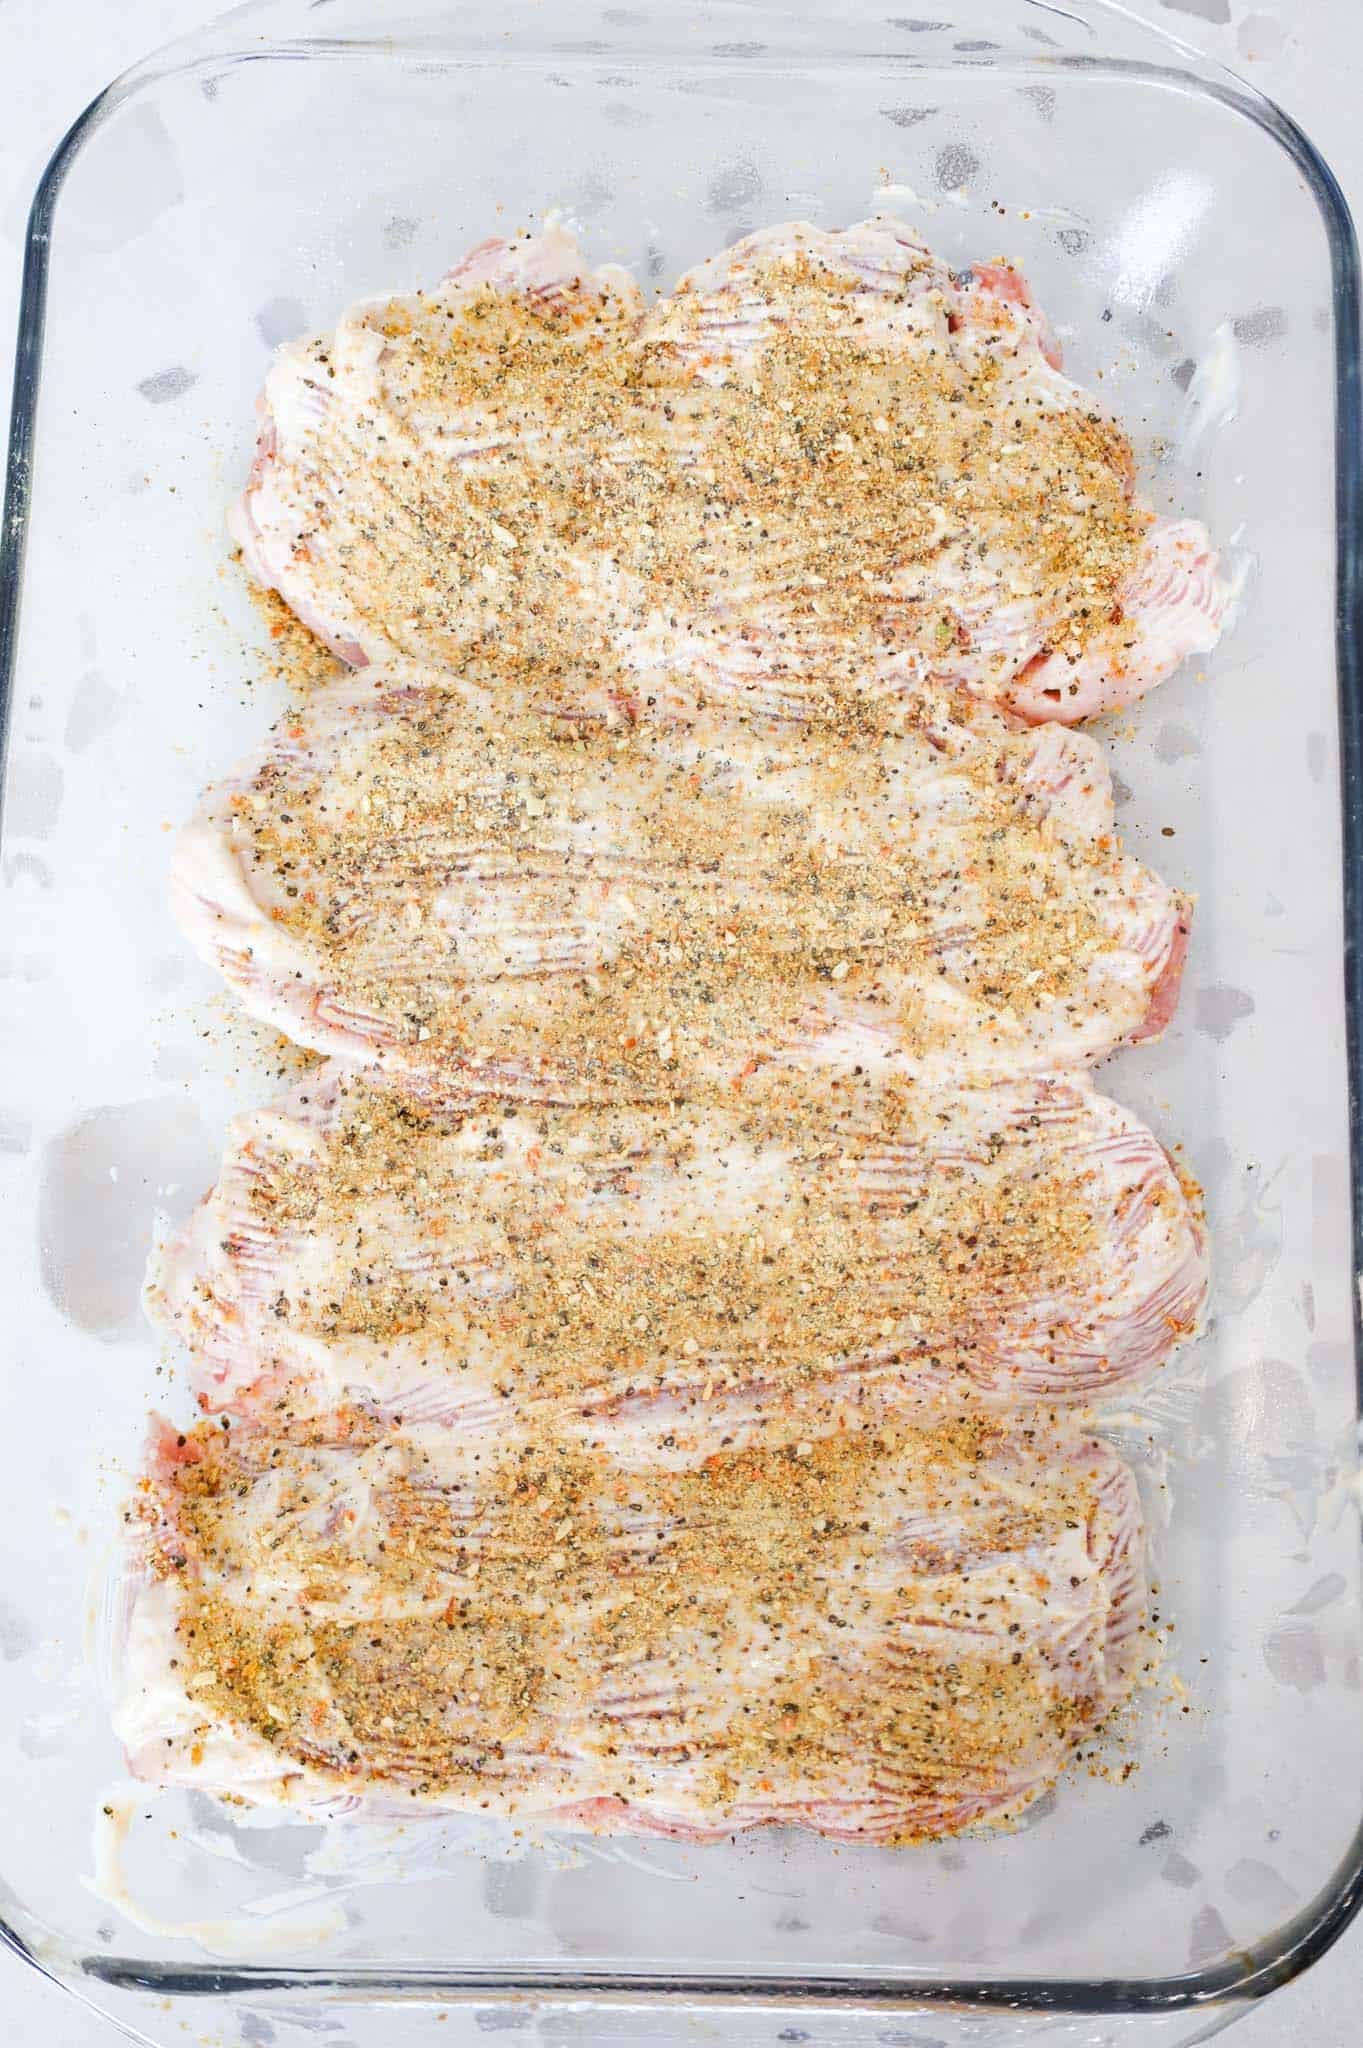 lemon pepper sprinkled on top of mayo coated pork chops in a baking dish